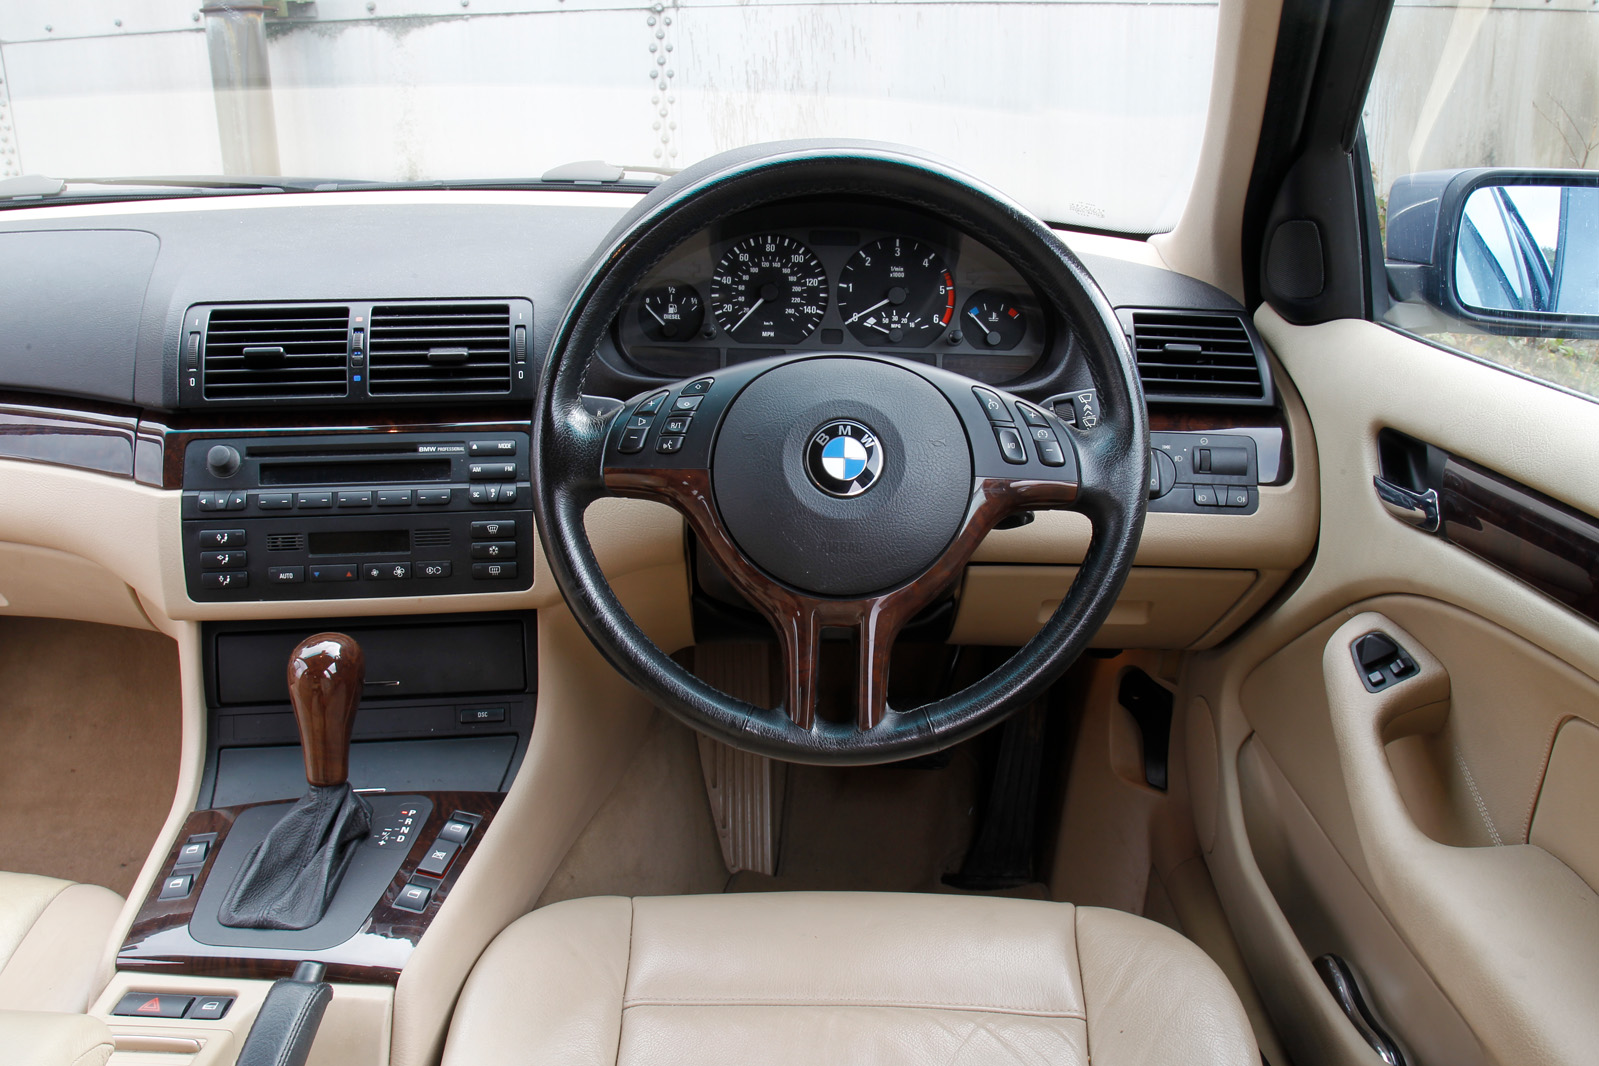 https://www.autocar.co.uk/sites/autocar.co.uk/files/images/car-reviews/first-drives/legacy/94-ubg-bmw-e46-3-series-interior.jpg